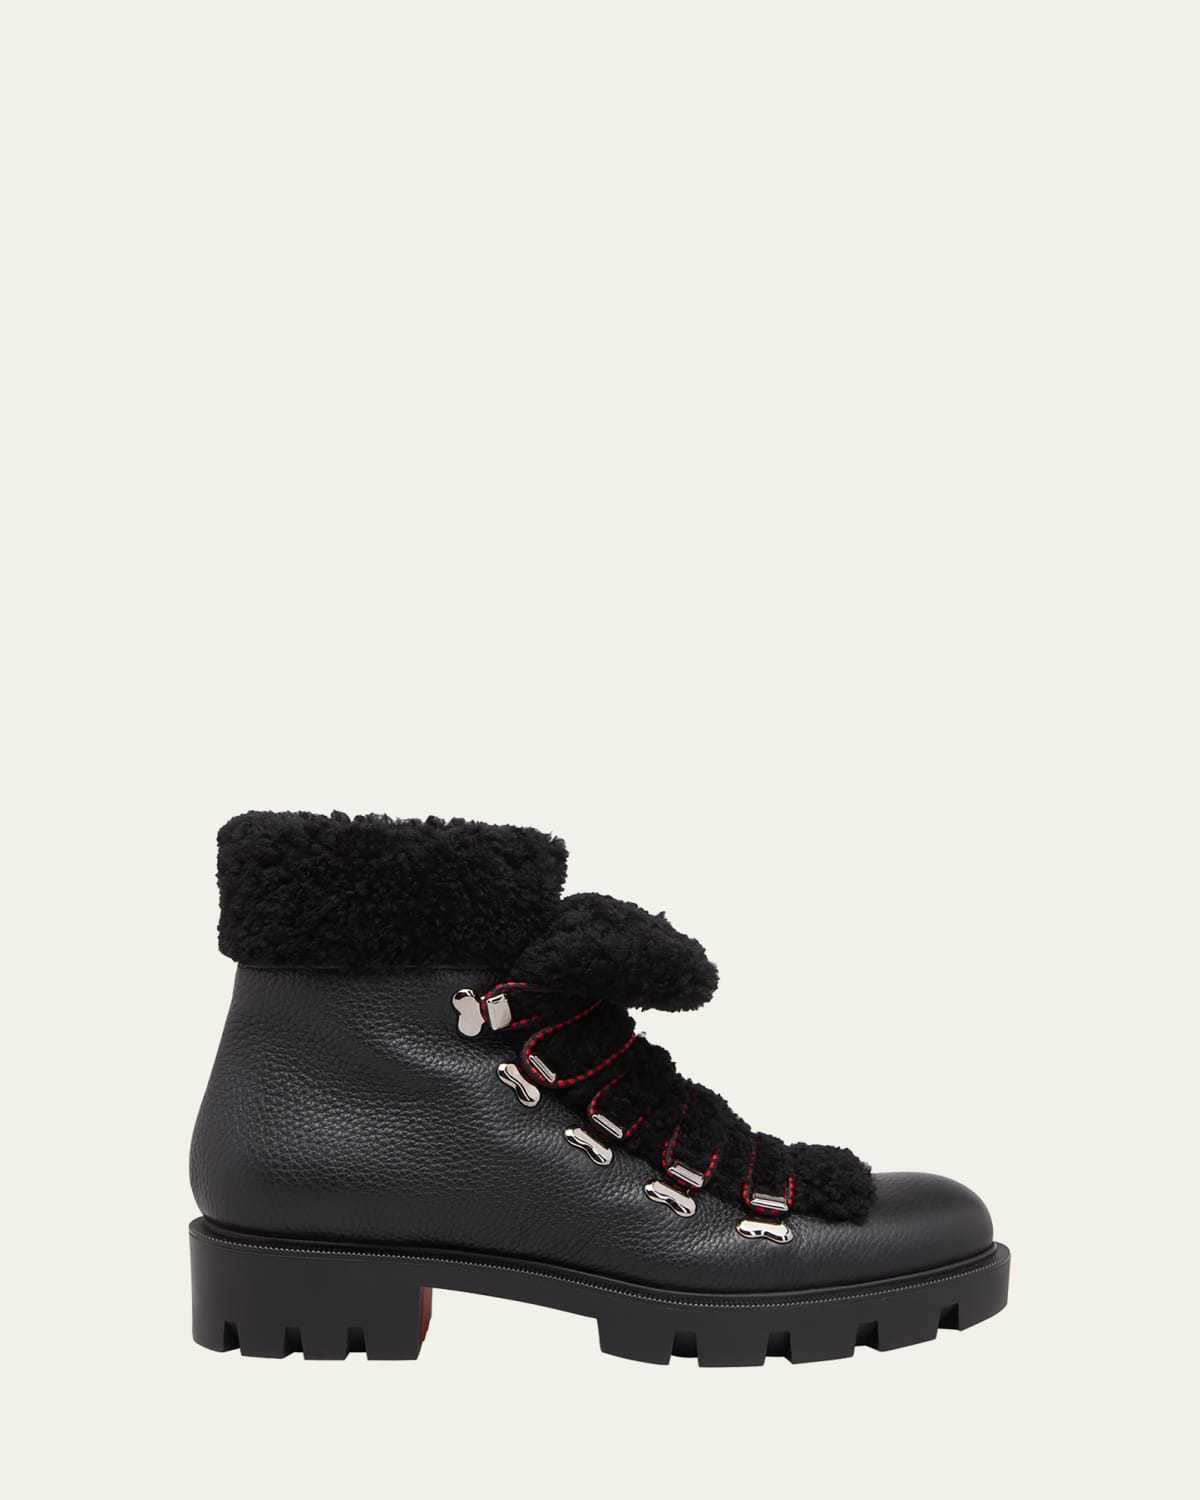 Edelvizir Leather Shearling Red Sole Ranger Booties